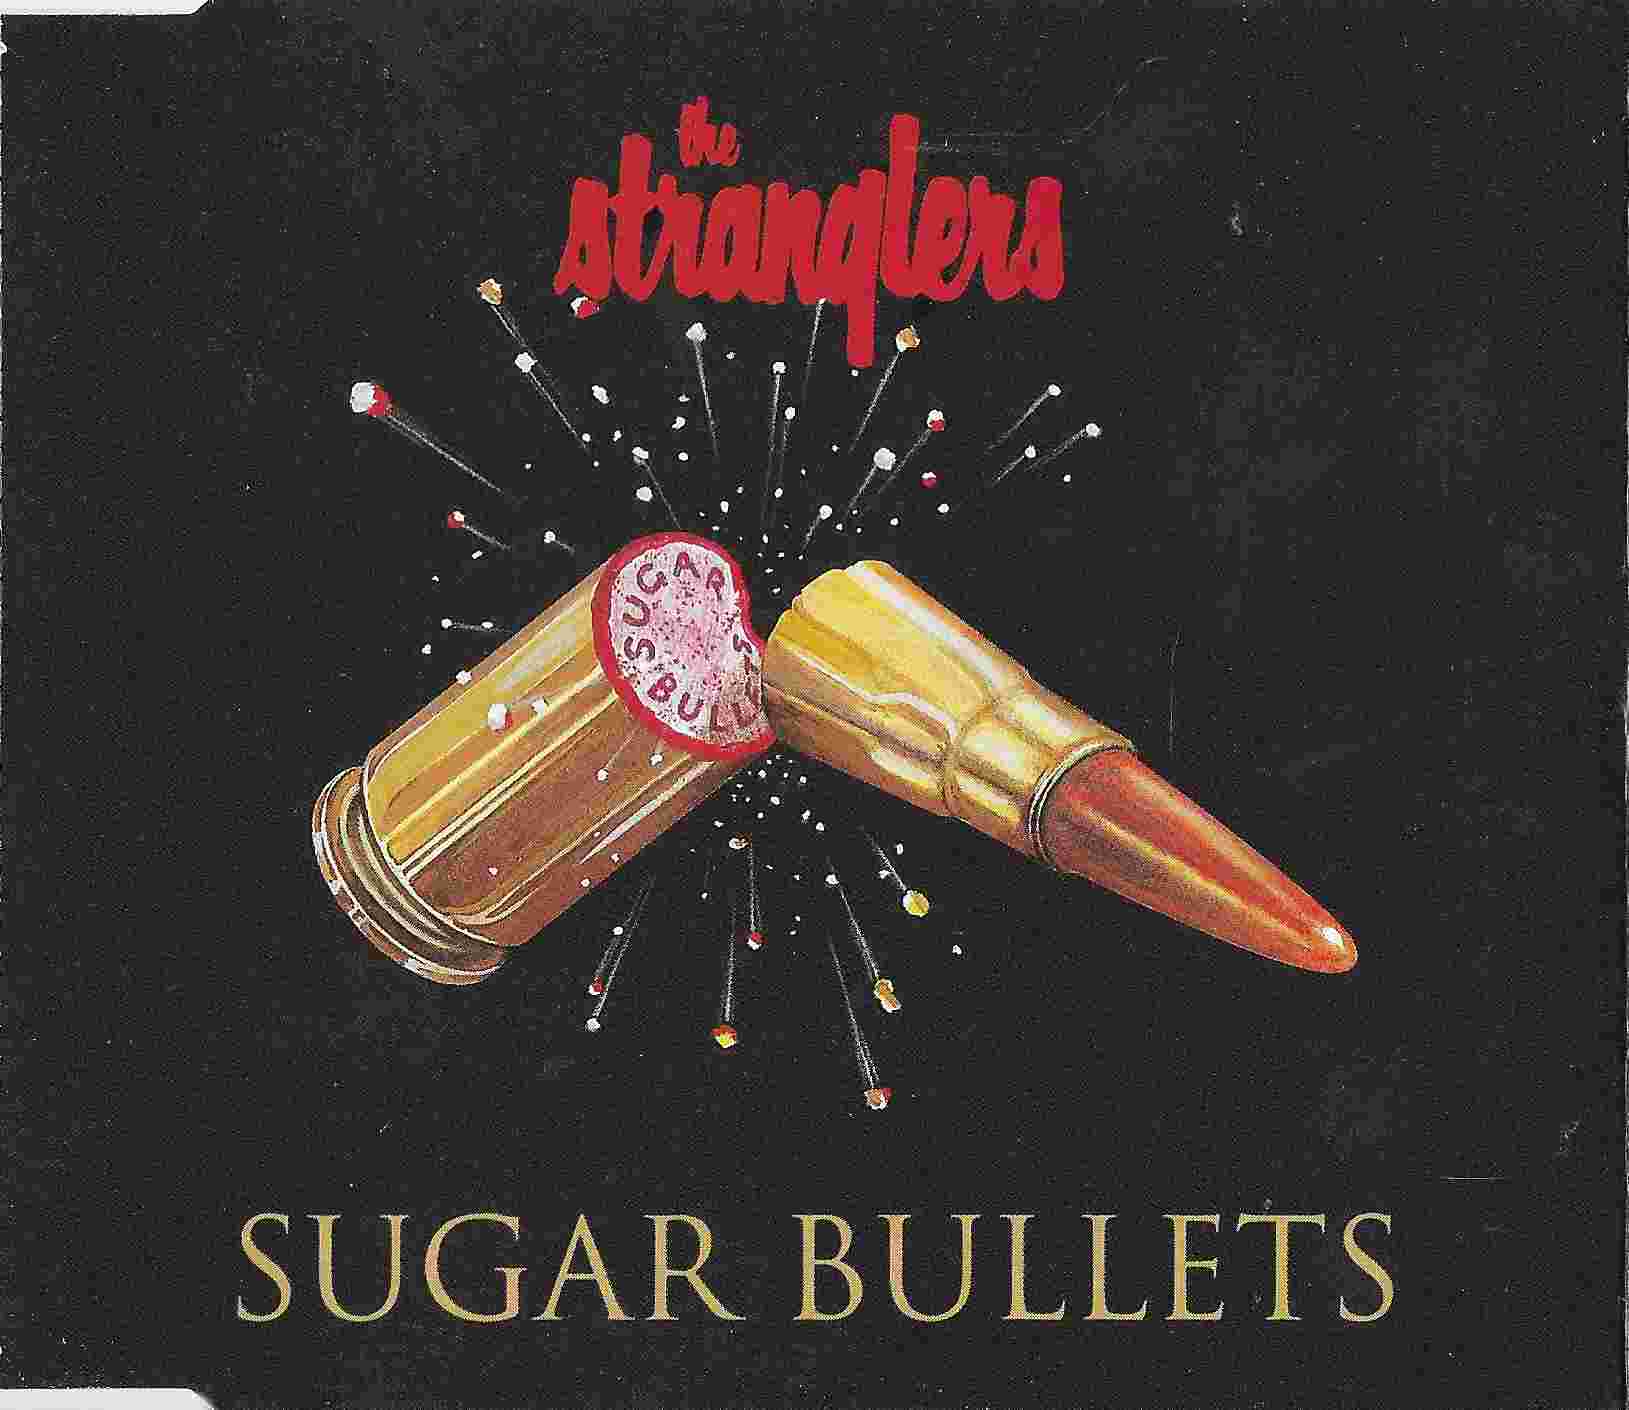 Picture of PSYCD 002 Sugar bullets by artist The Stranglers